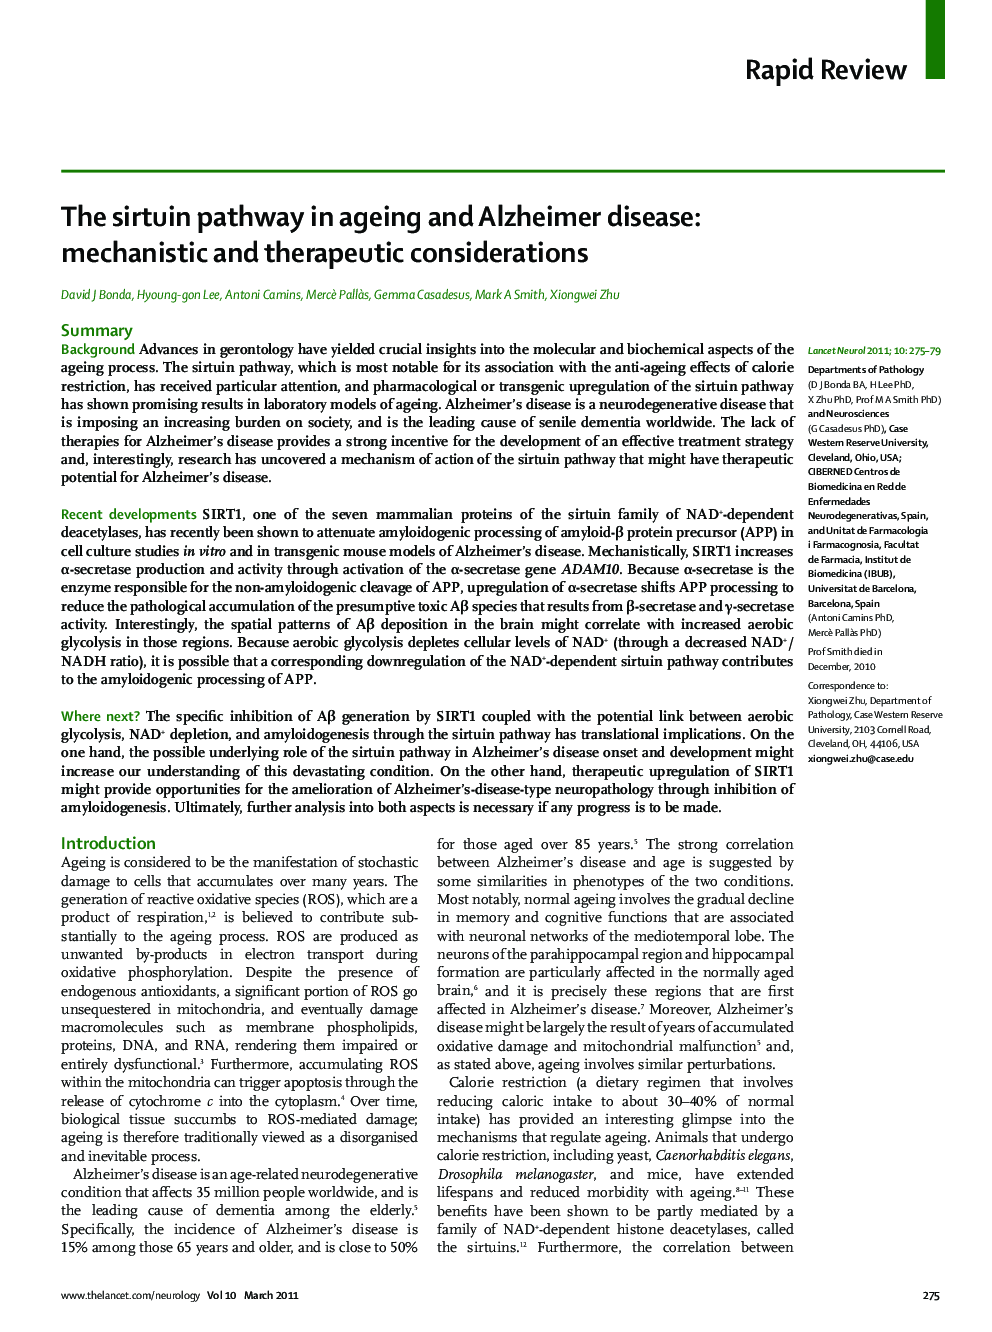 The sirtuin pathway in ageing and Alzheimer disease: mechanistic and therapeutic considerations